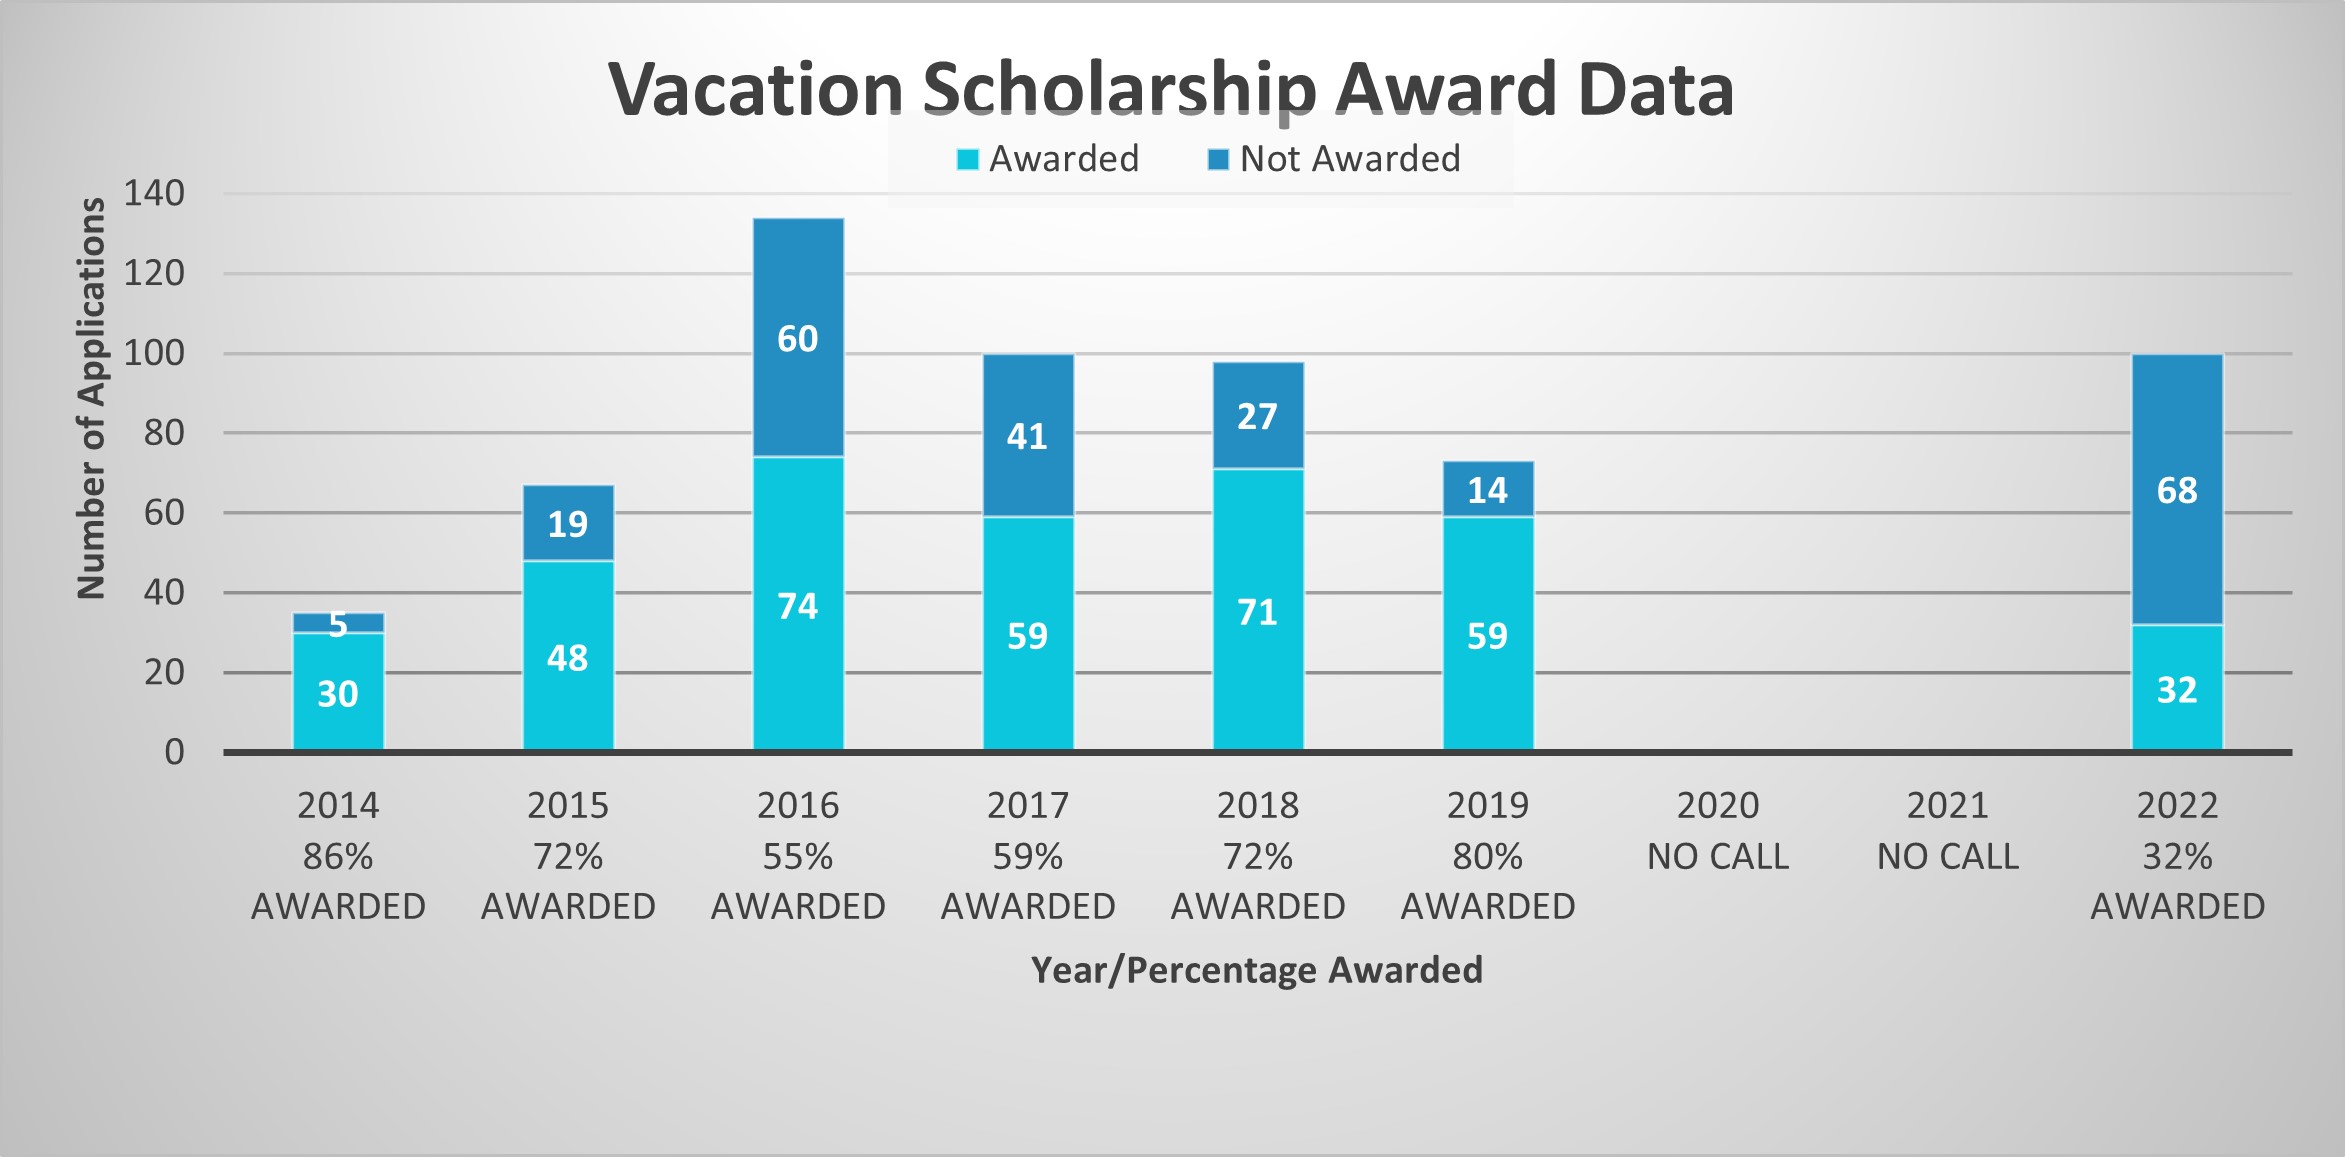 Chart showing how the application and award rates varied from 2014 to 2021 for Vacation Scholarships